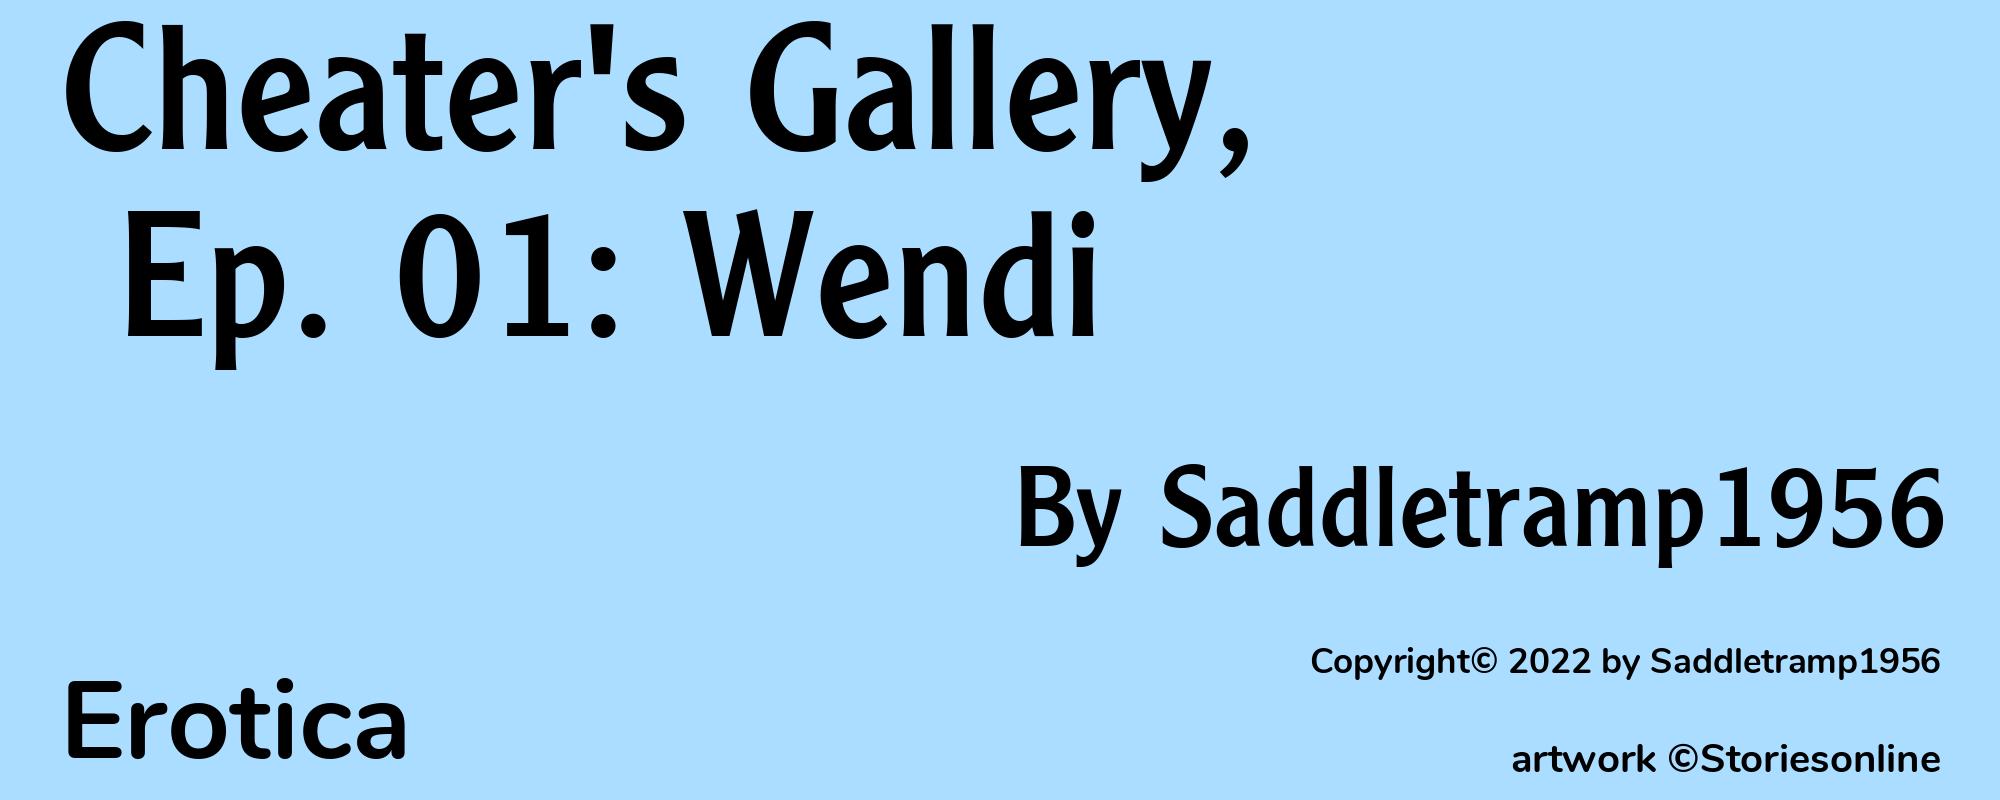 Cheater's Gallery, Ep. 01: Wendi - Cover